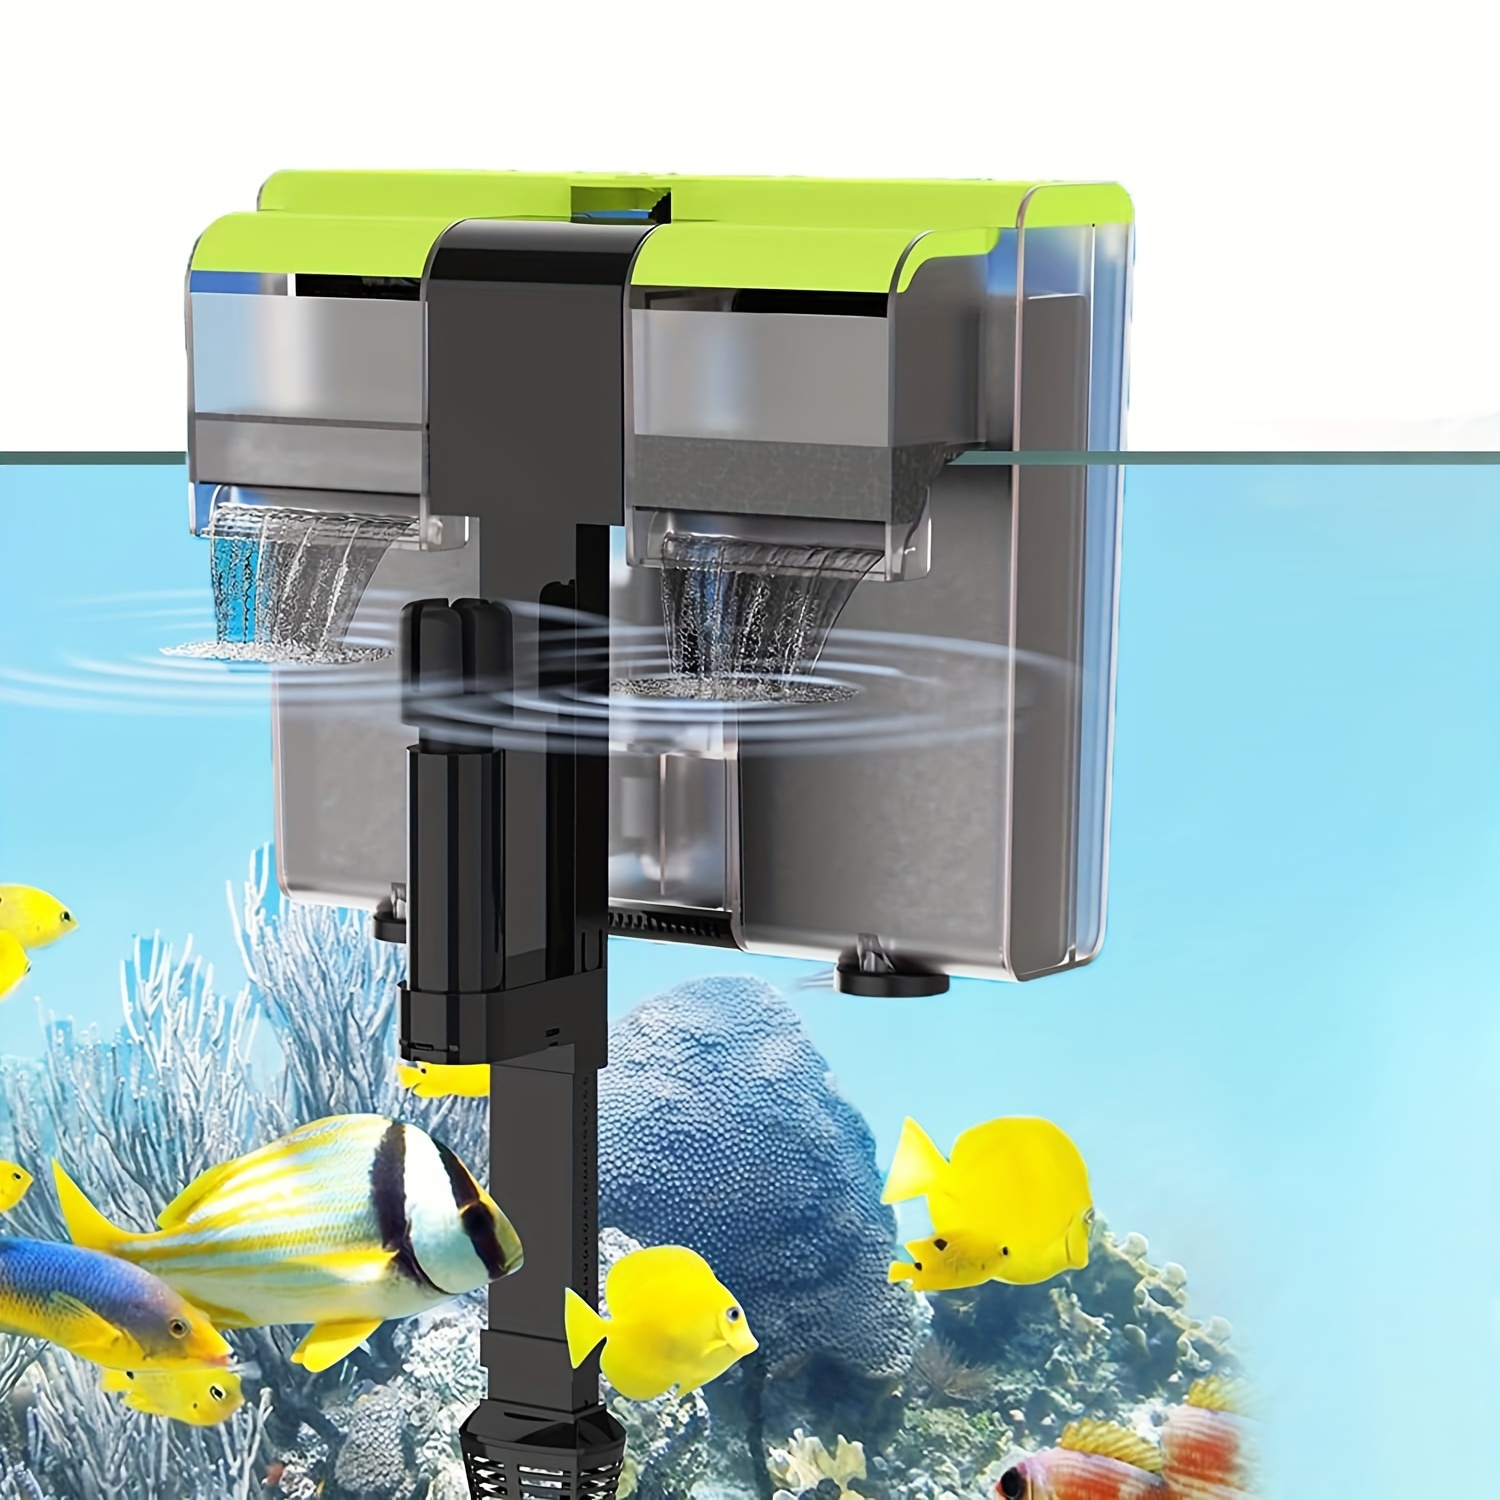 

Aquarium 3-in-1 External Filter System Tool, Tank Waterfall Wall-mountable Filtration Unit, 3-step Biochemical Sponge & Activated Carbon Purification, Odor Removal